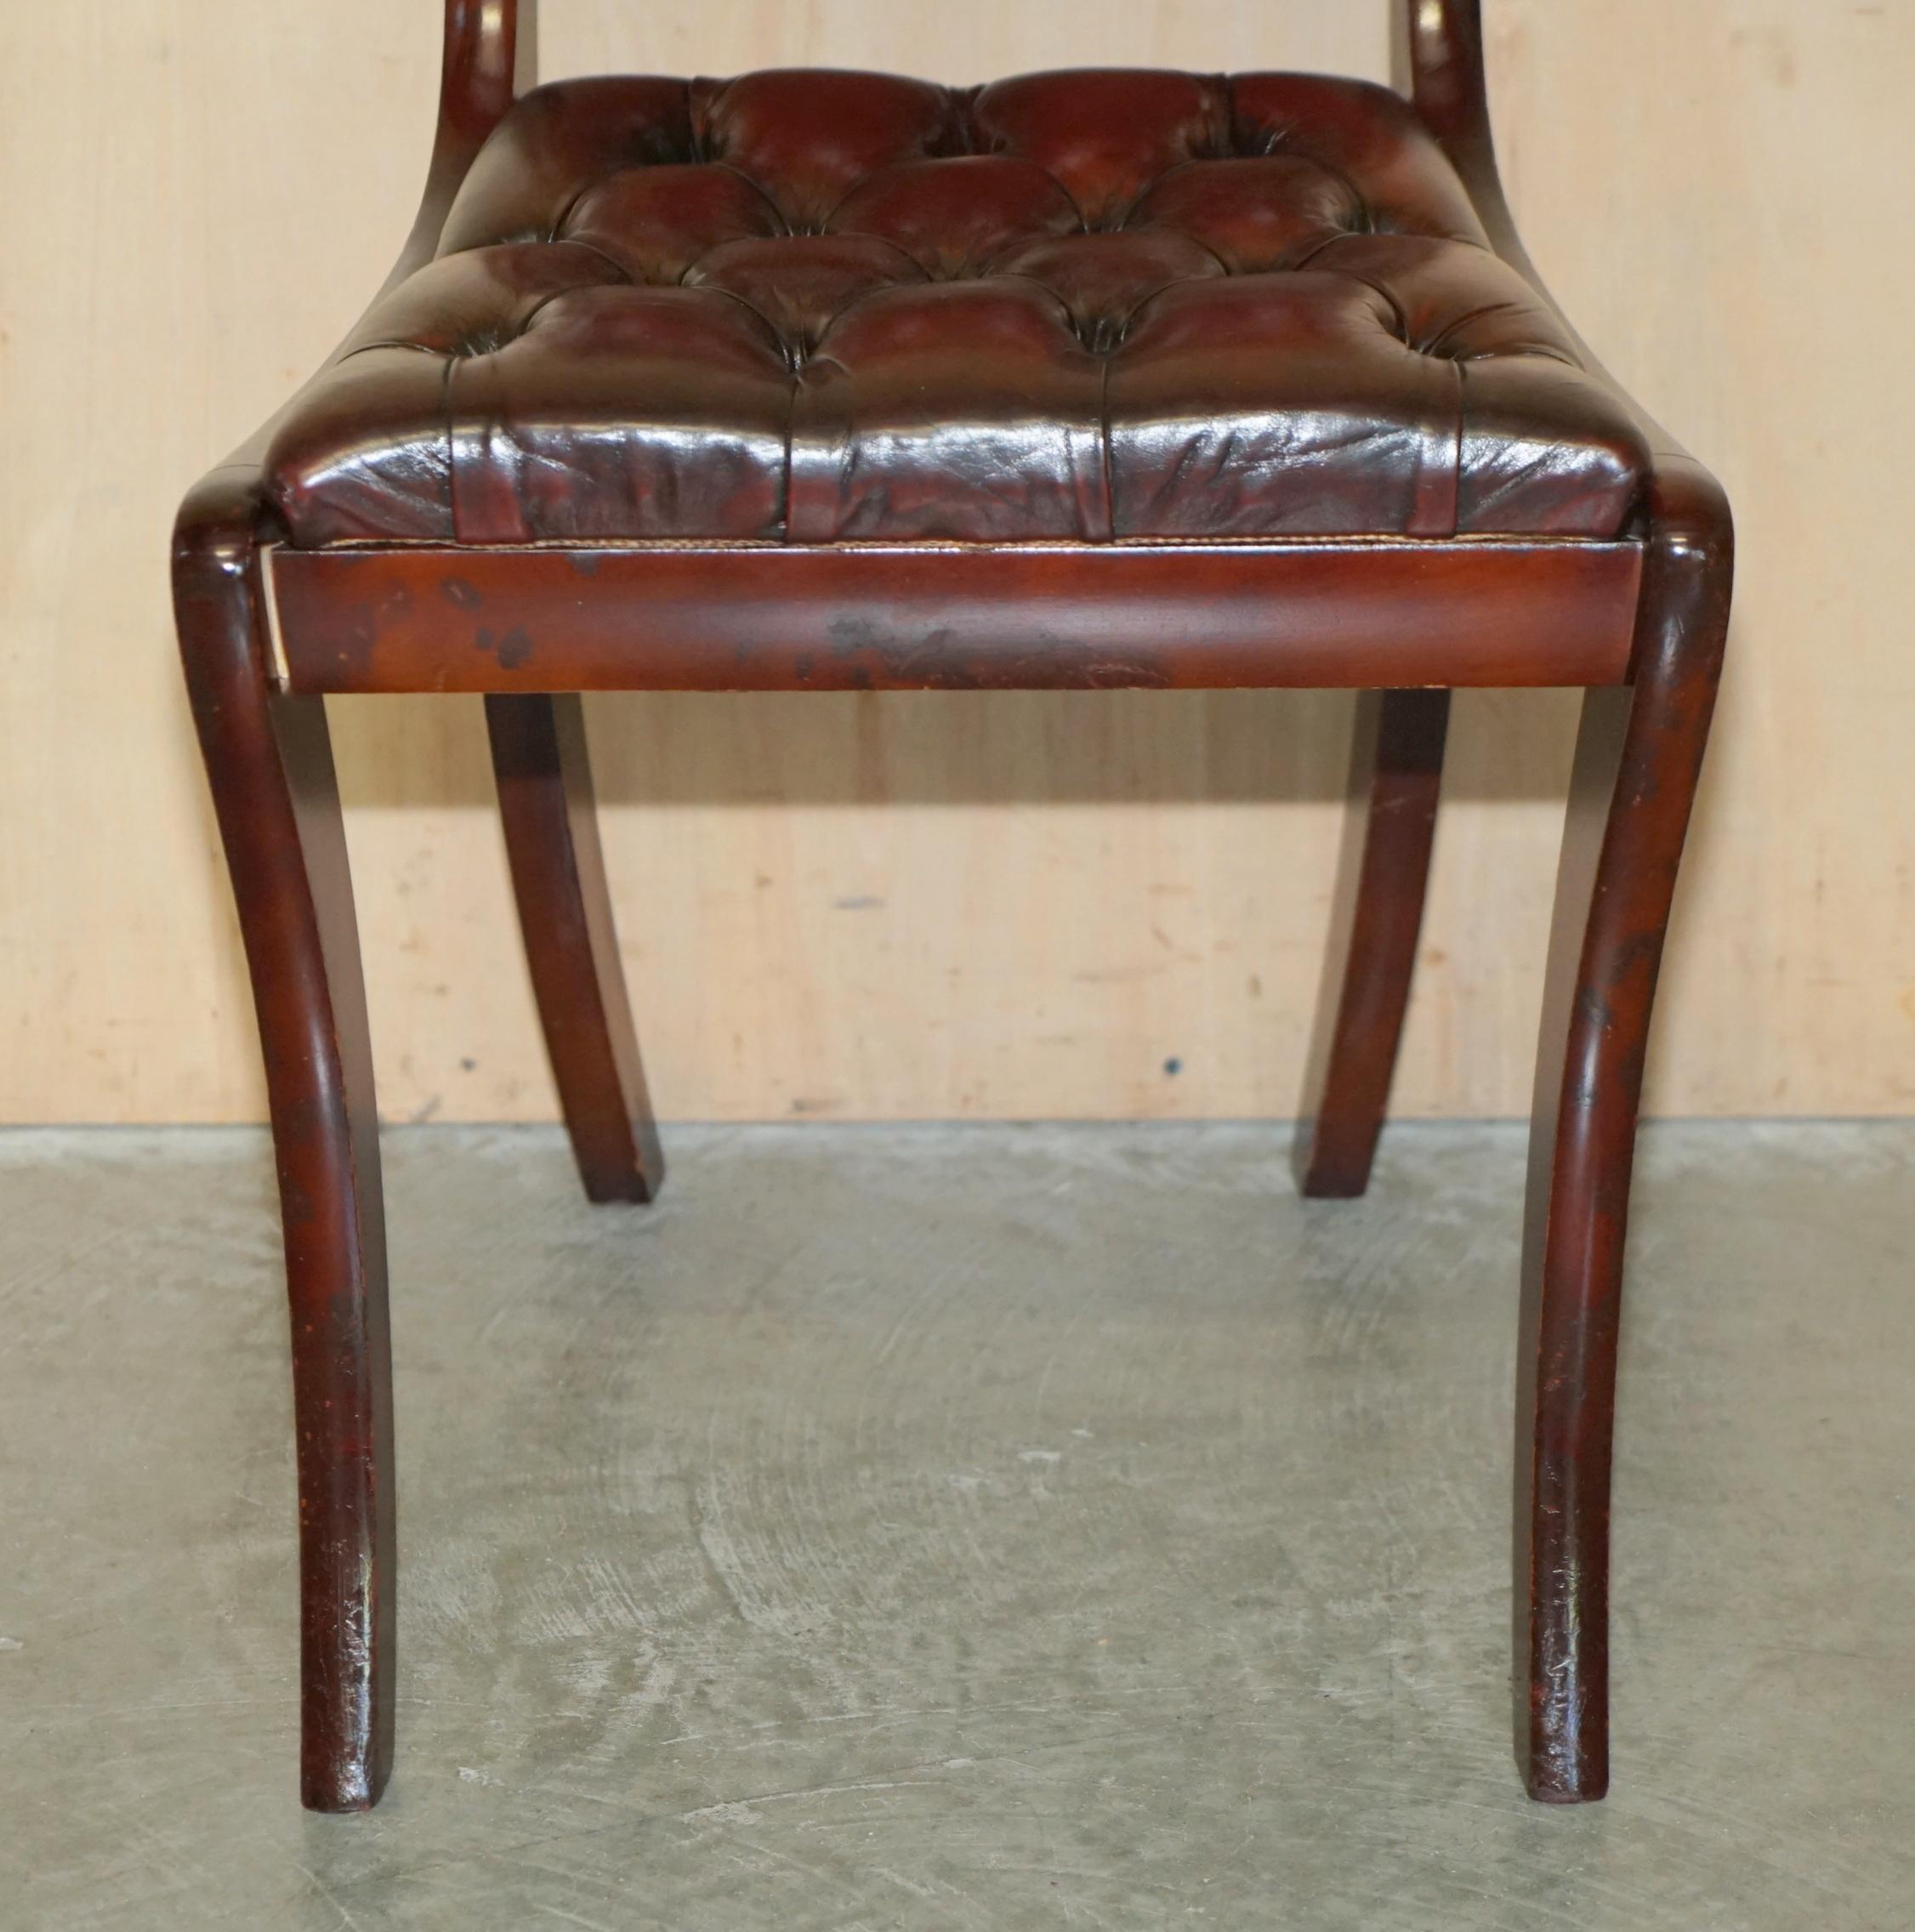 SIX VINTAGE HARDWOOD FULLY RESTORED CHESTERFIELD OXBOOD LEATHER DiNING CHAIRS 6 For Sale 2